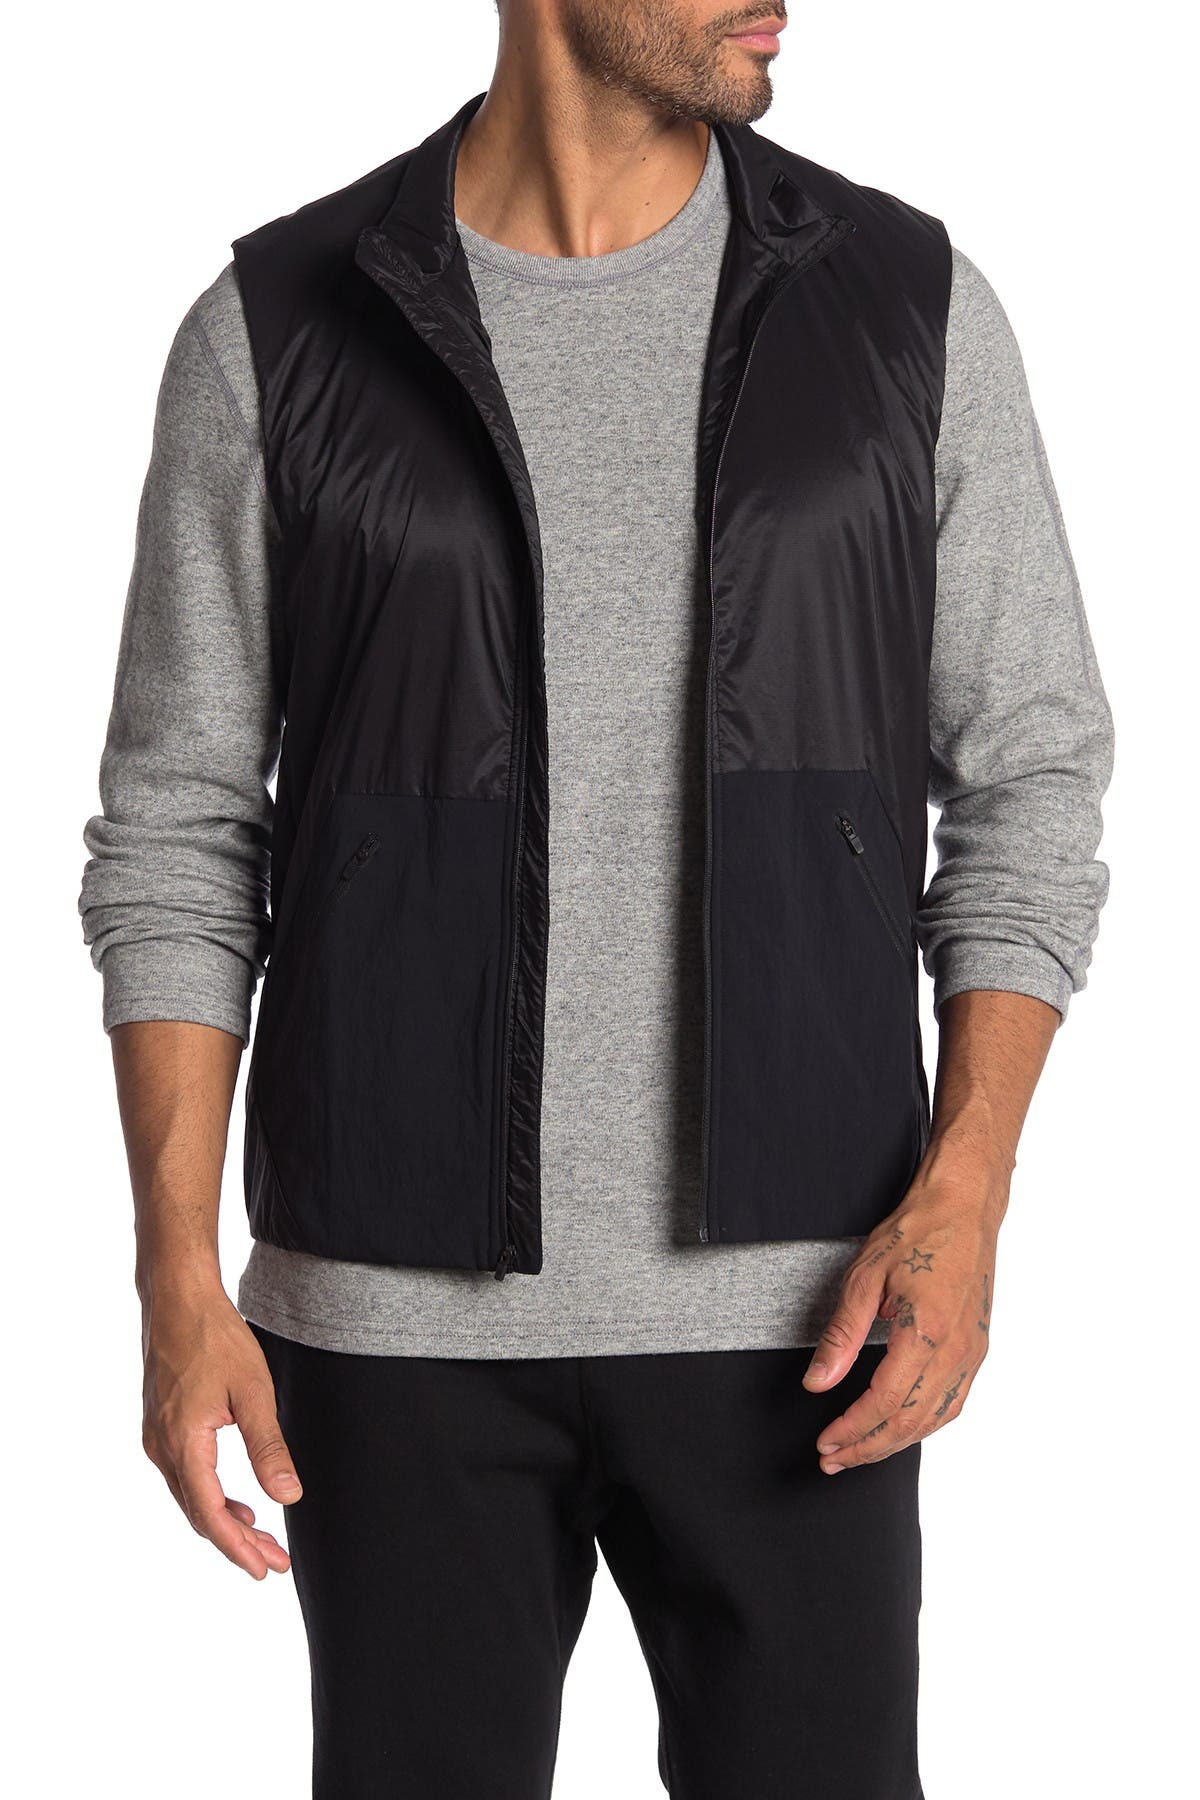 reigning champ insulated bomber